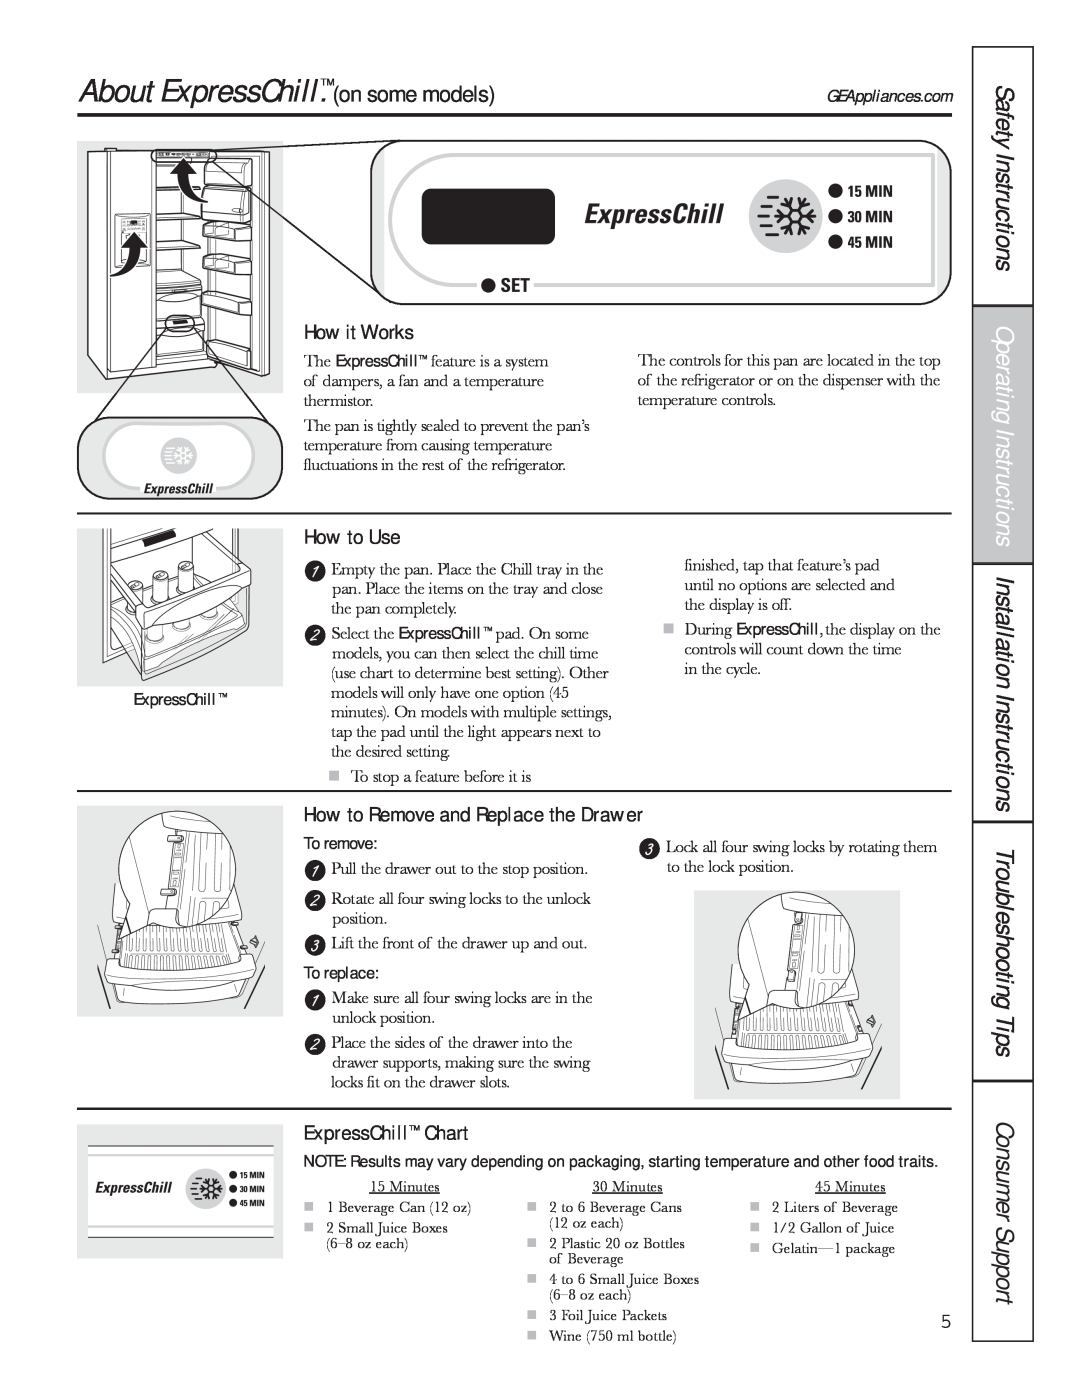 GE 200D8074P044 About ExpressChill.on some models, Safety Instructions, Installation Instructions Troubleshooting Tips 